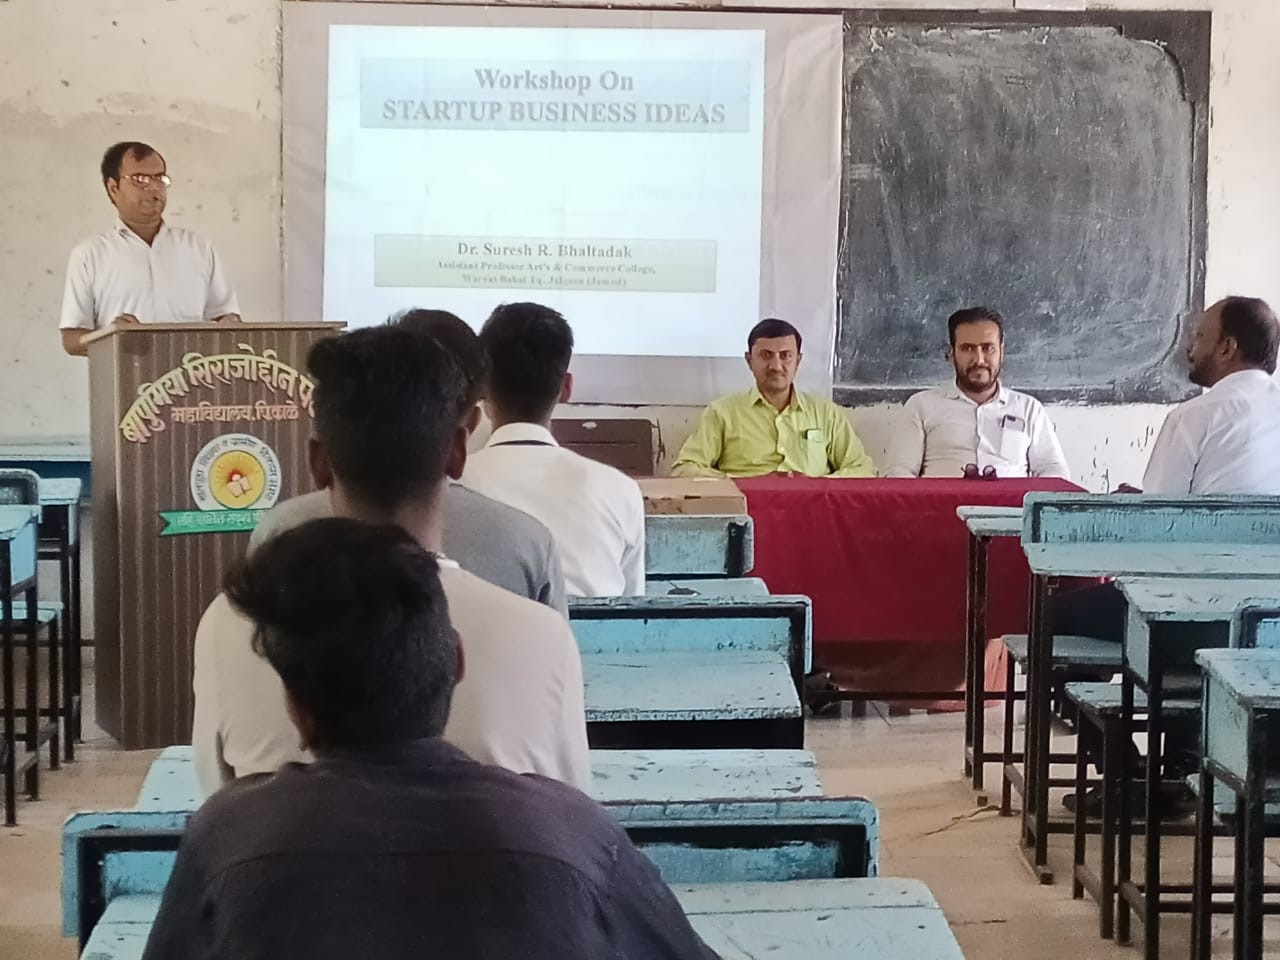 Startup Business Ideas Workshop Organized by Department of Physics A.Y. 2021-22